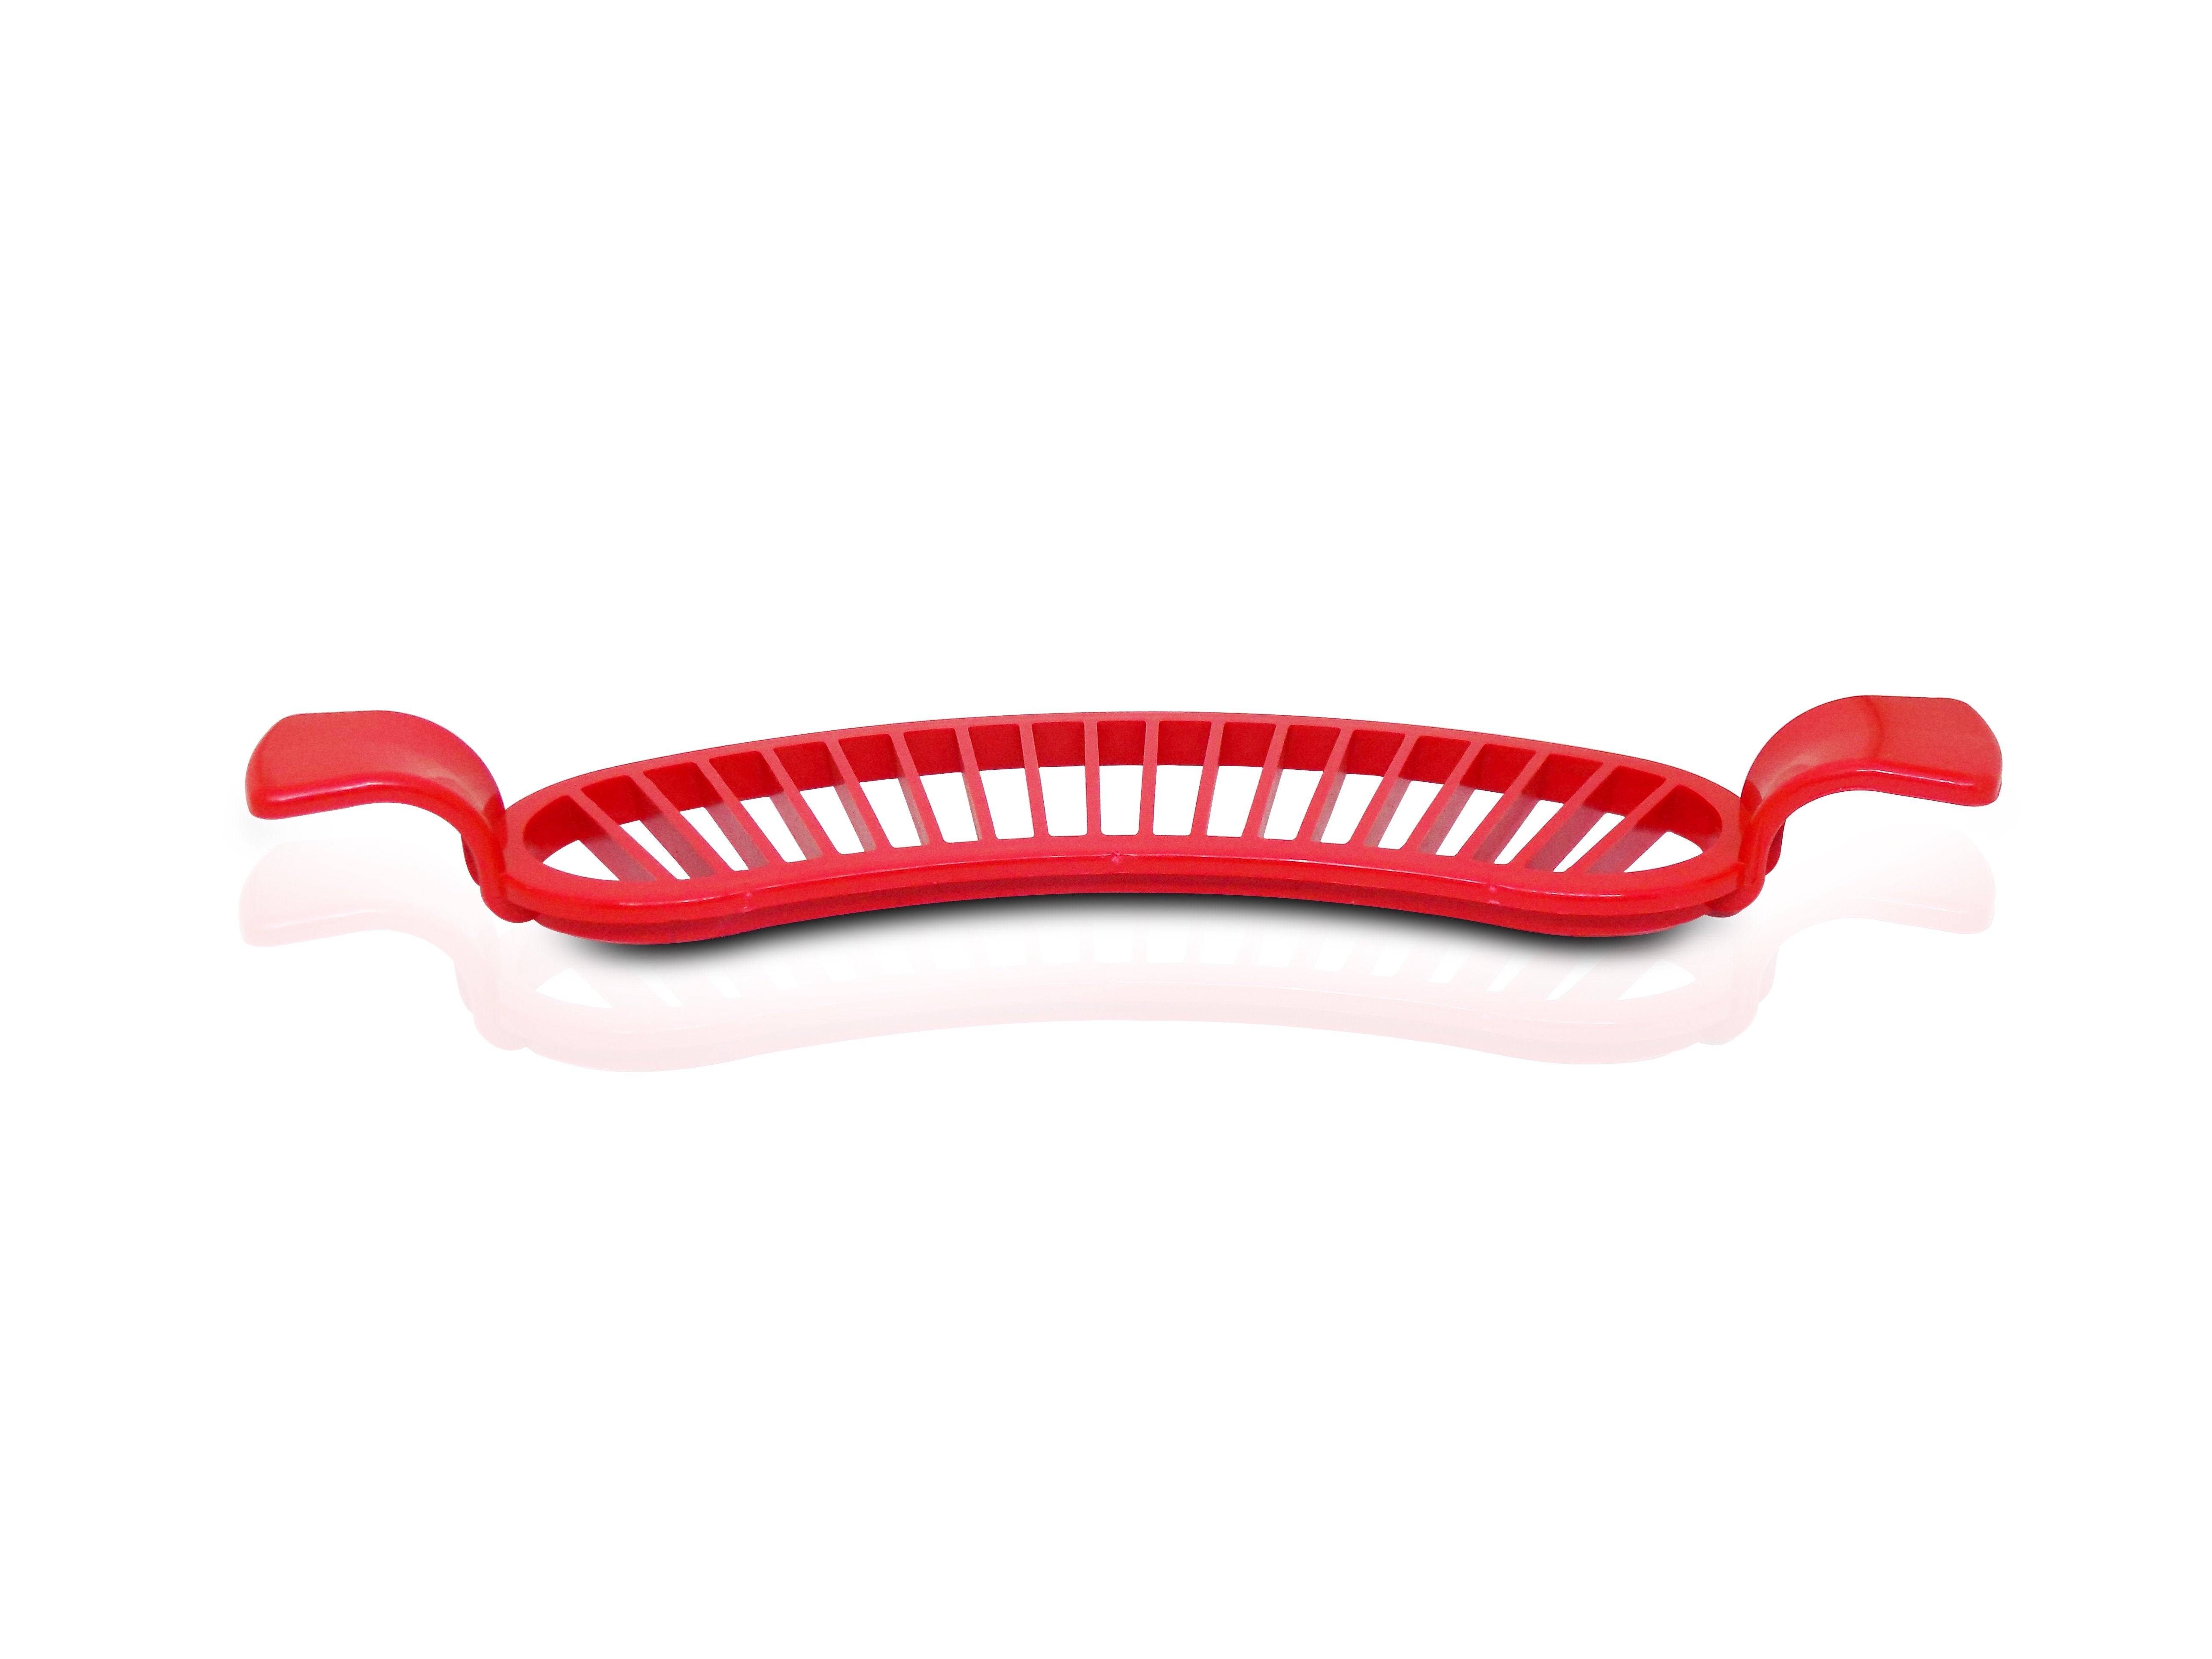 2084 Plastic Banana Slicer/Cutter With Handle - SkyShopy